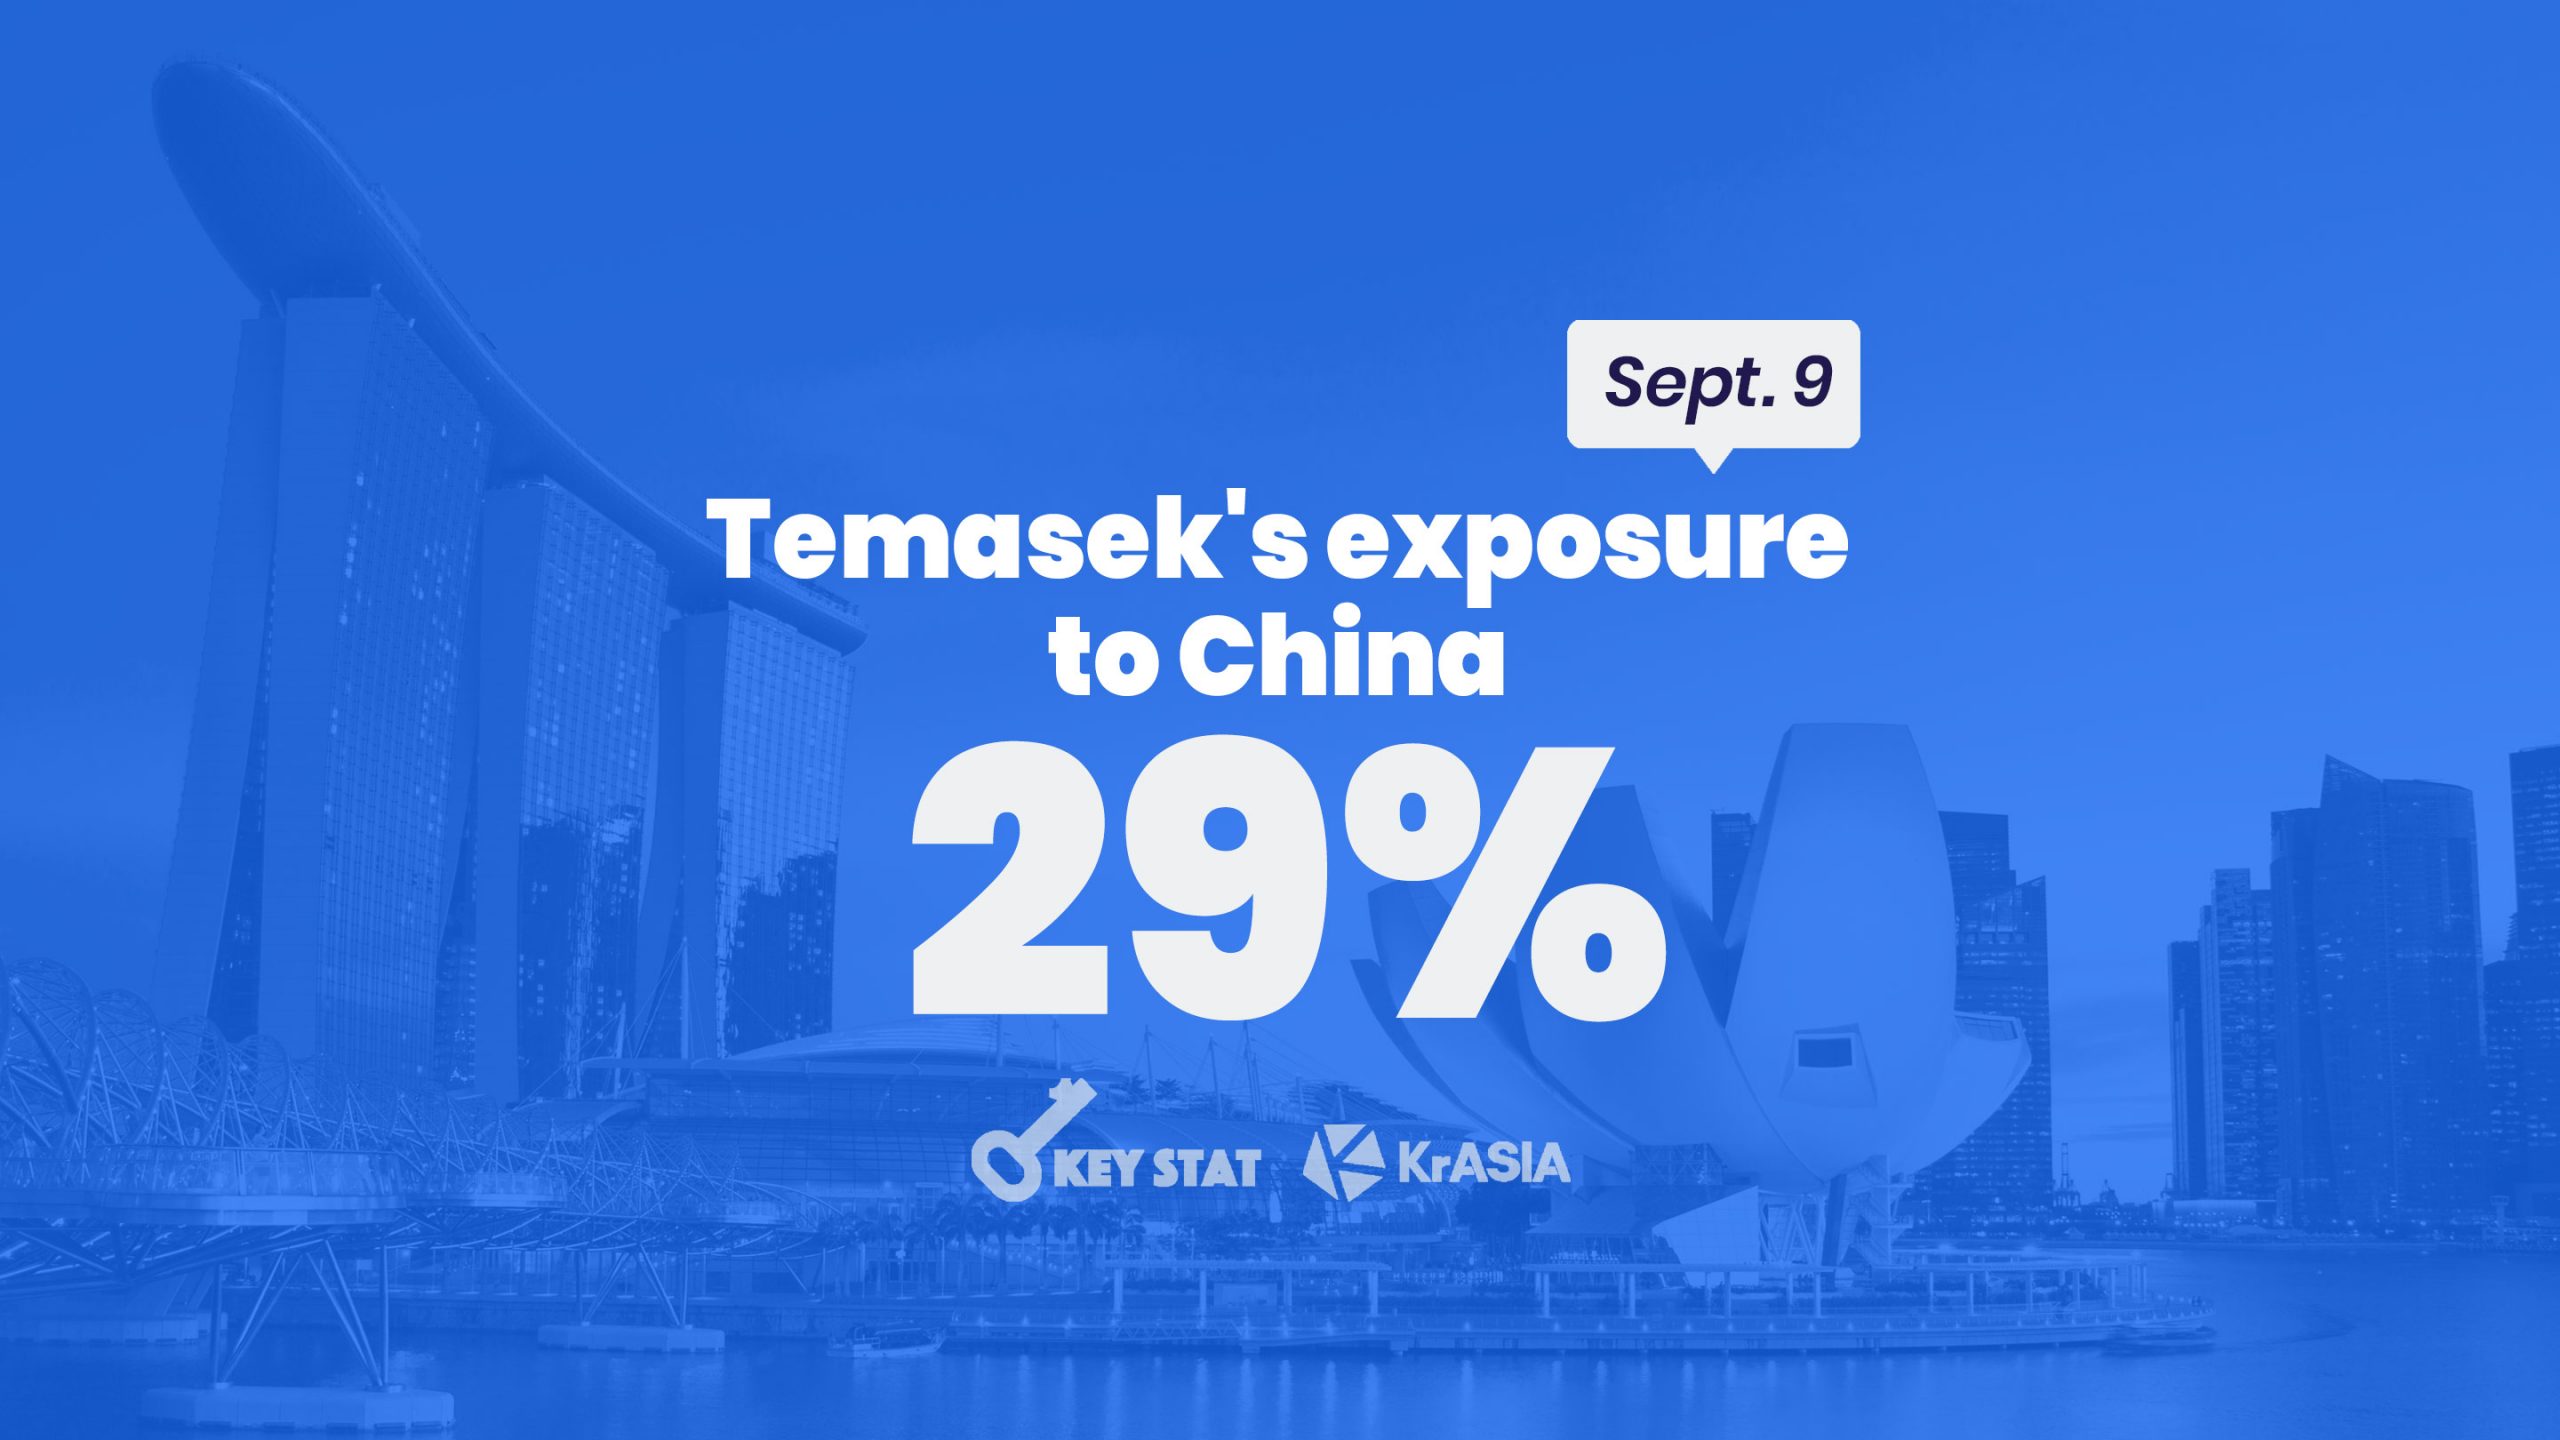 KEY STAT | Temasek's assets in China exceed Singapore for first time |  KrASIA